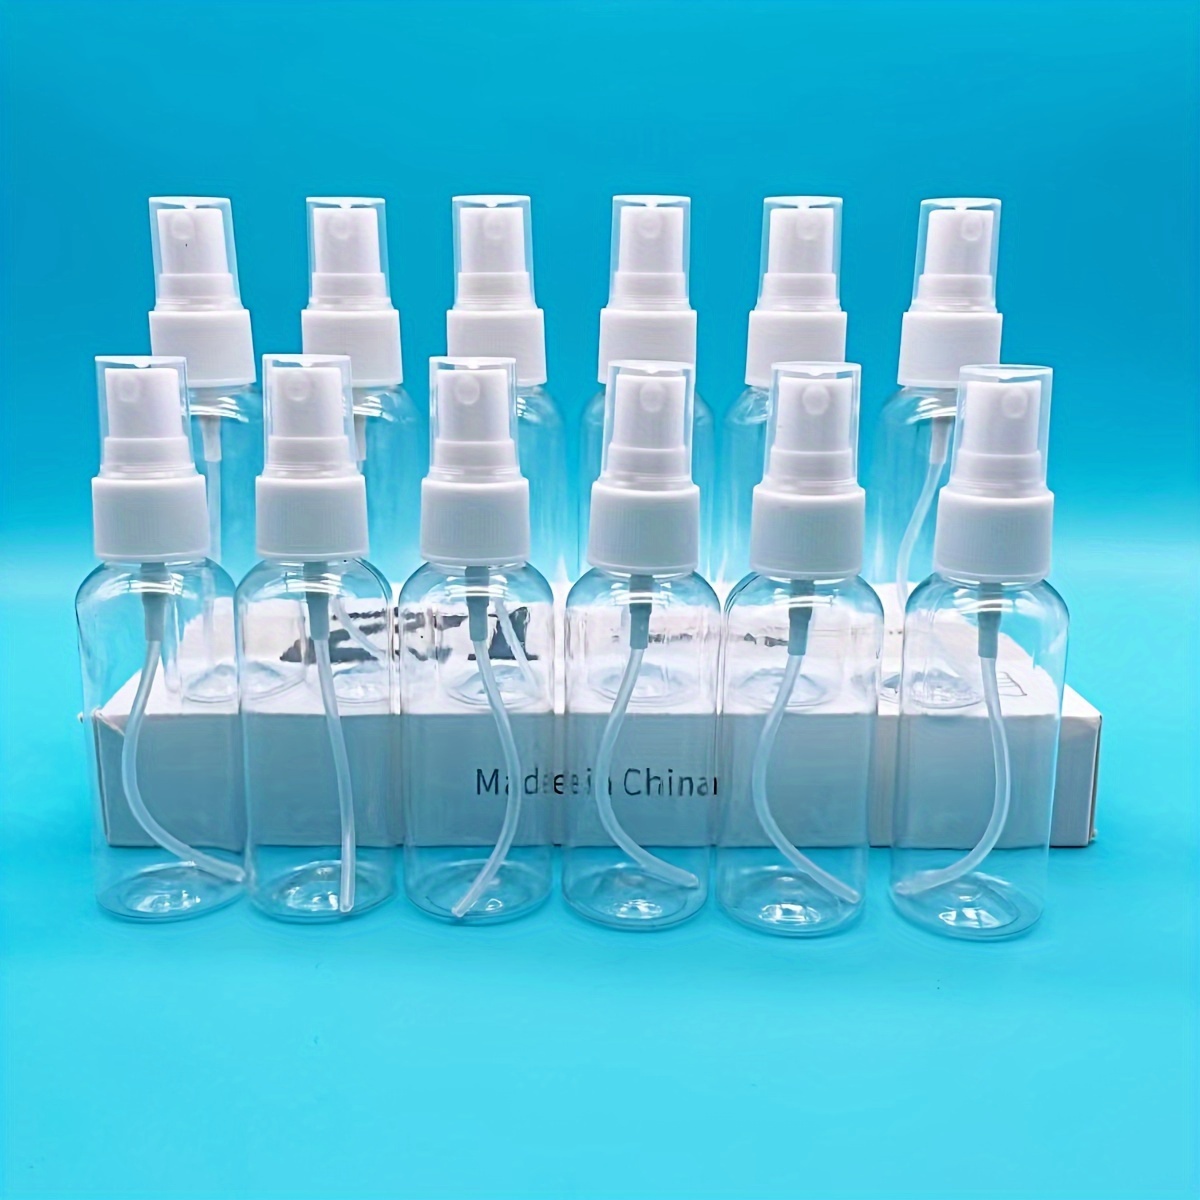 

12pcs Small Fine Mist Spray Bottles Empty Refillable Makeup Sample Containers Perfume Atomizer Portable For Travel, 30/50/60/100ml